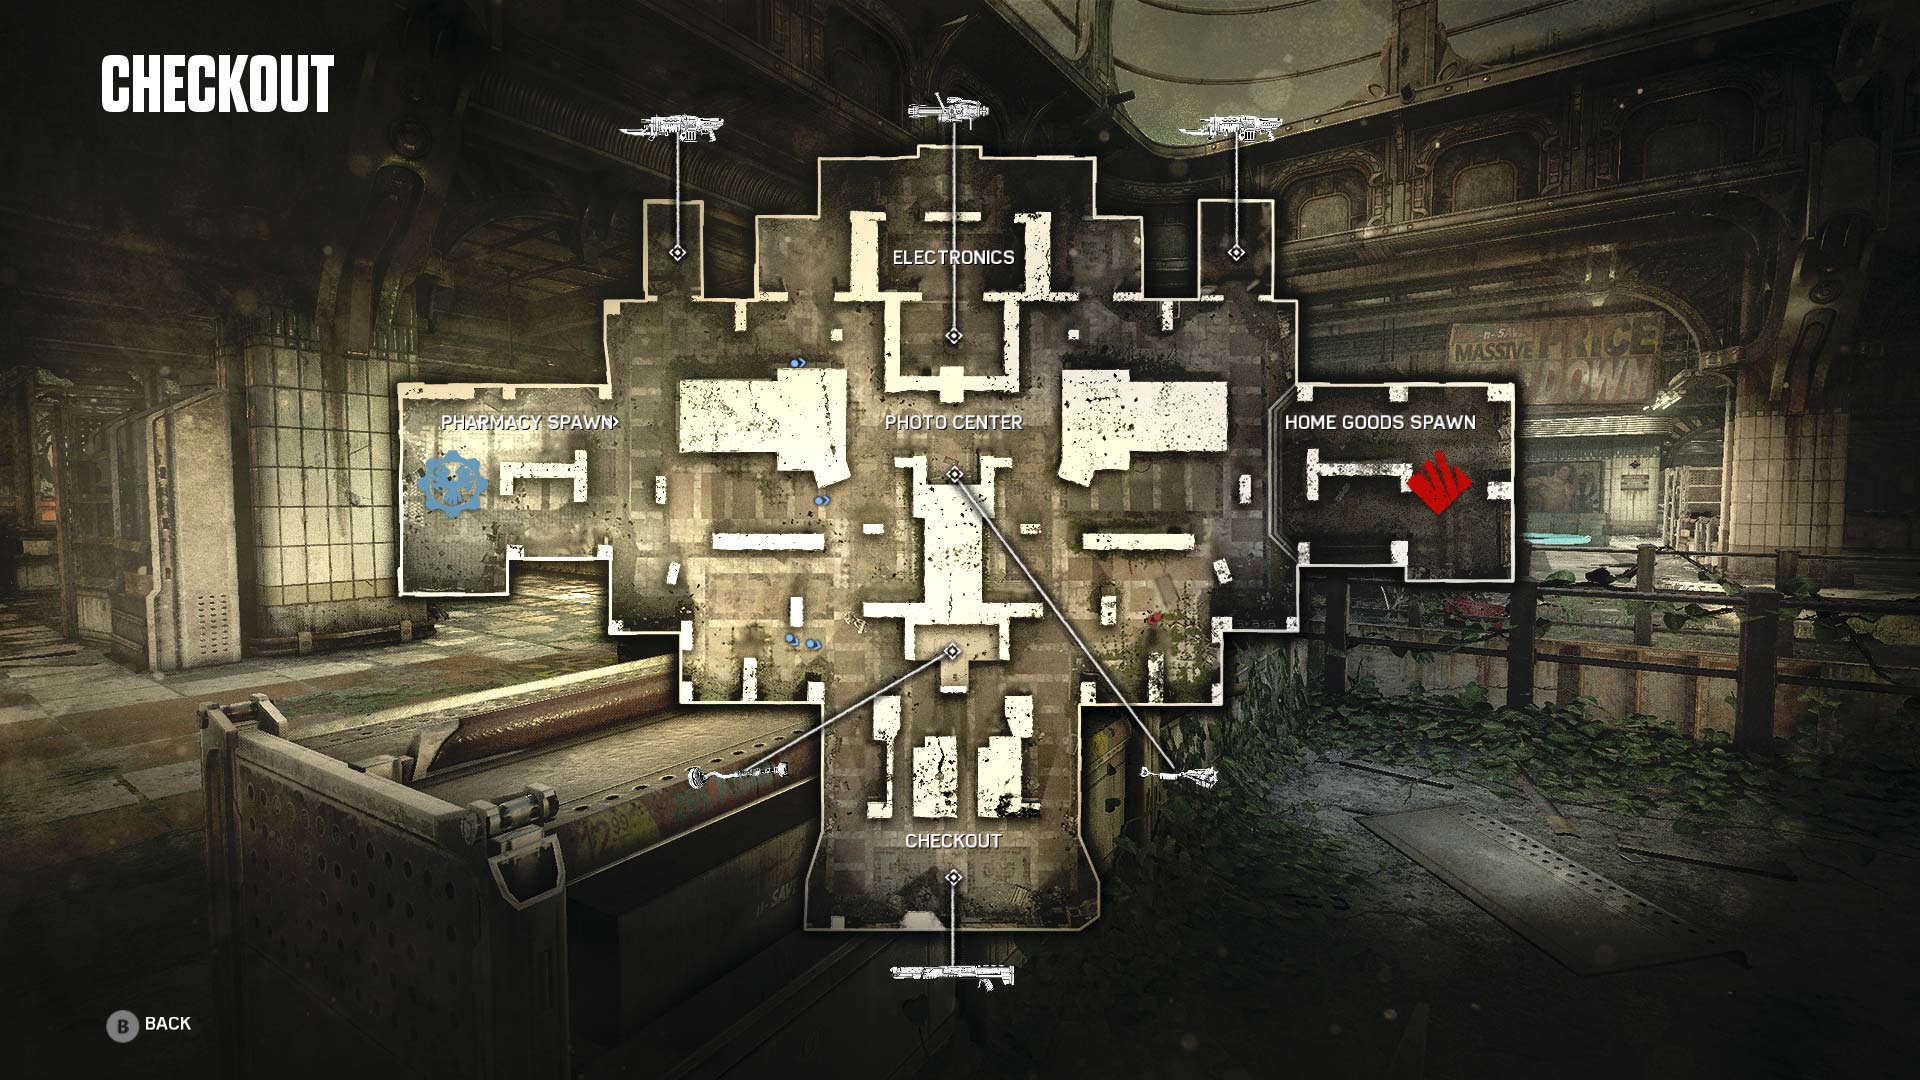 Gears of War 4 Checkout Multiplayer Map